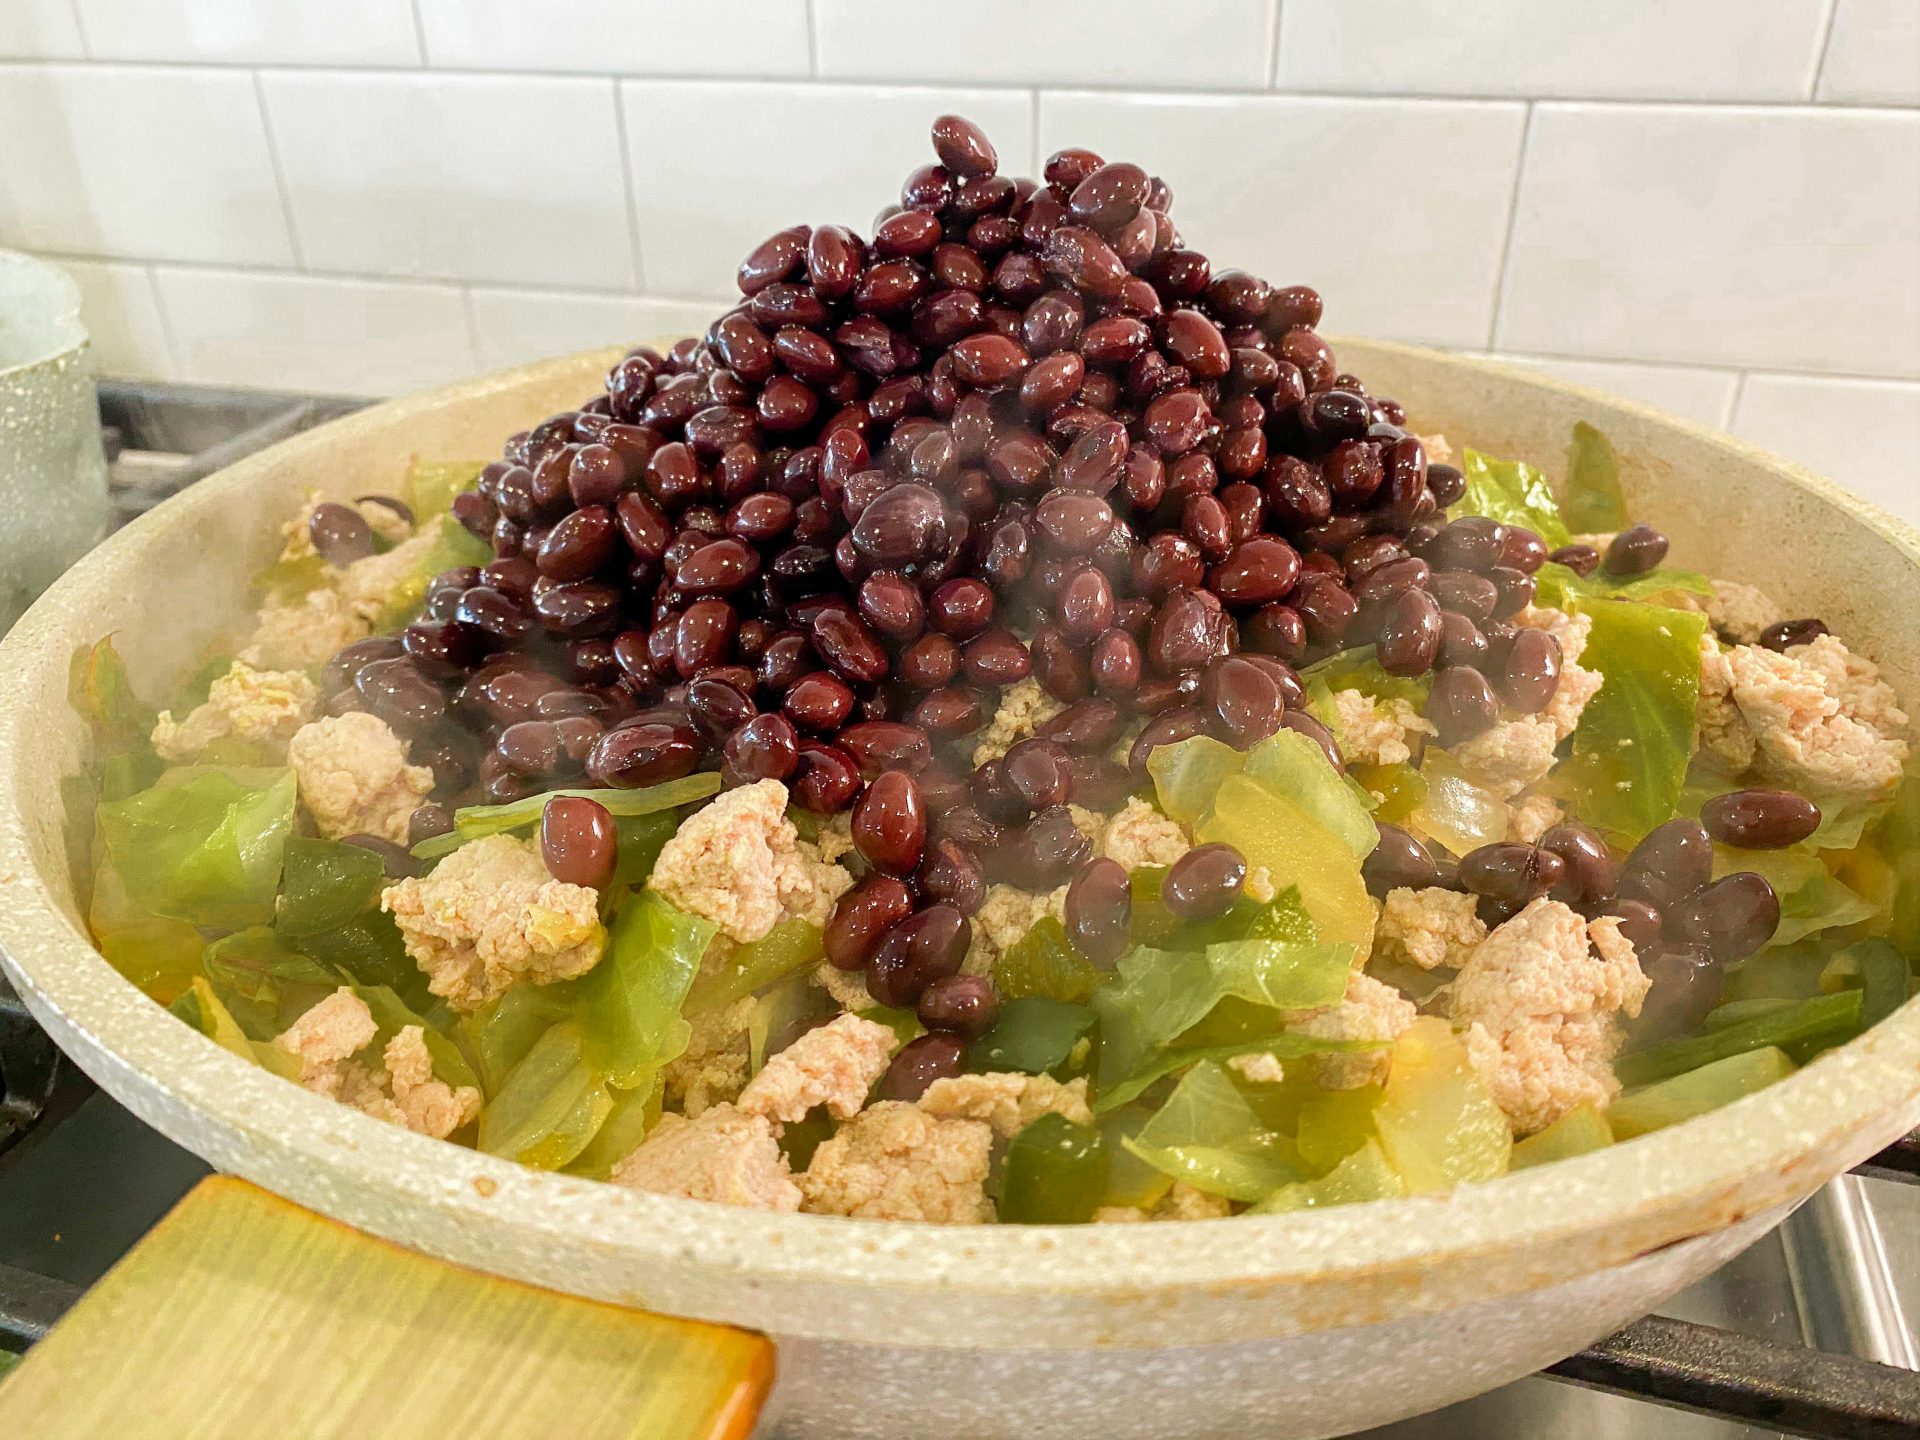 go to dinner, eating healthy after a trip, gluten-free, dairy-free, protein, healthy bowl, chipotle copy cat, ground turkey, siiete, black beans, turkey, the best dinner, weight loss meal, food